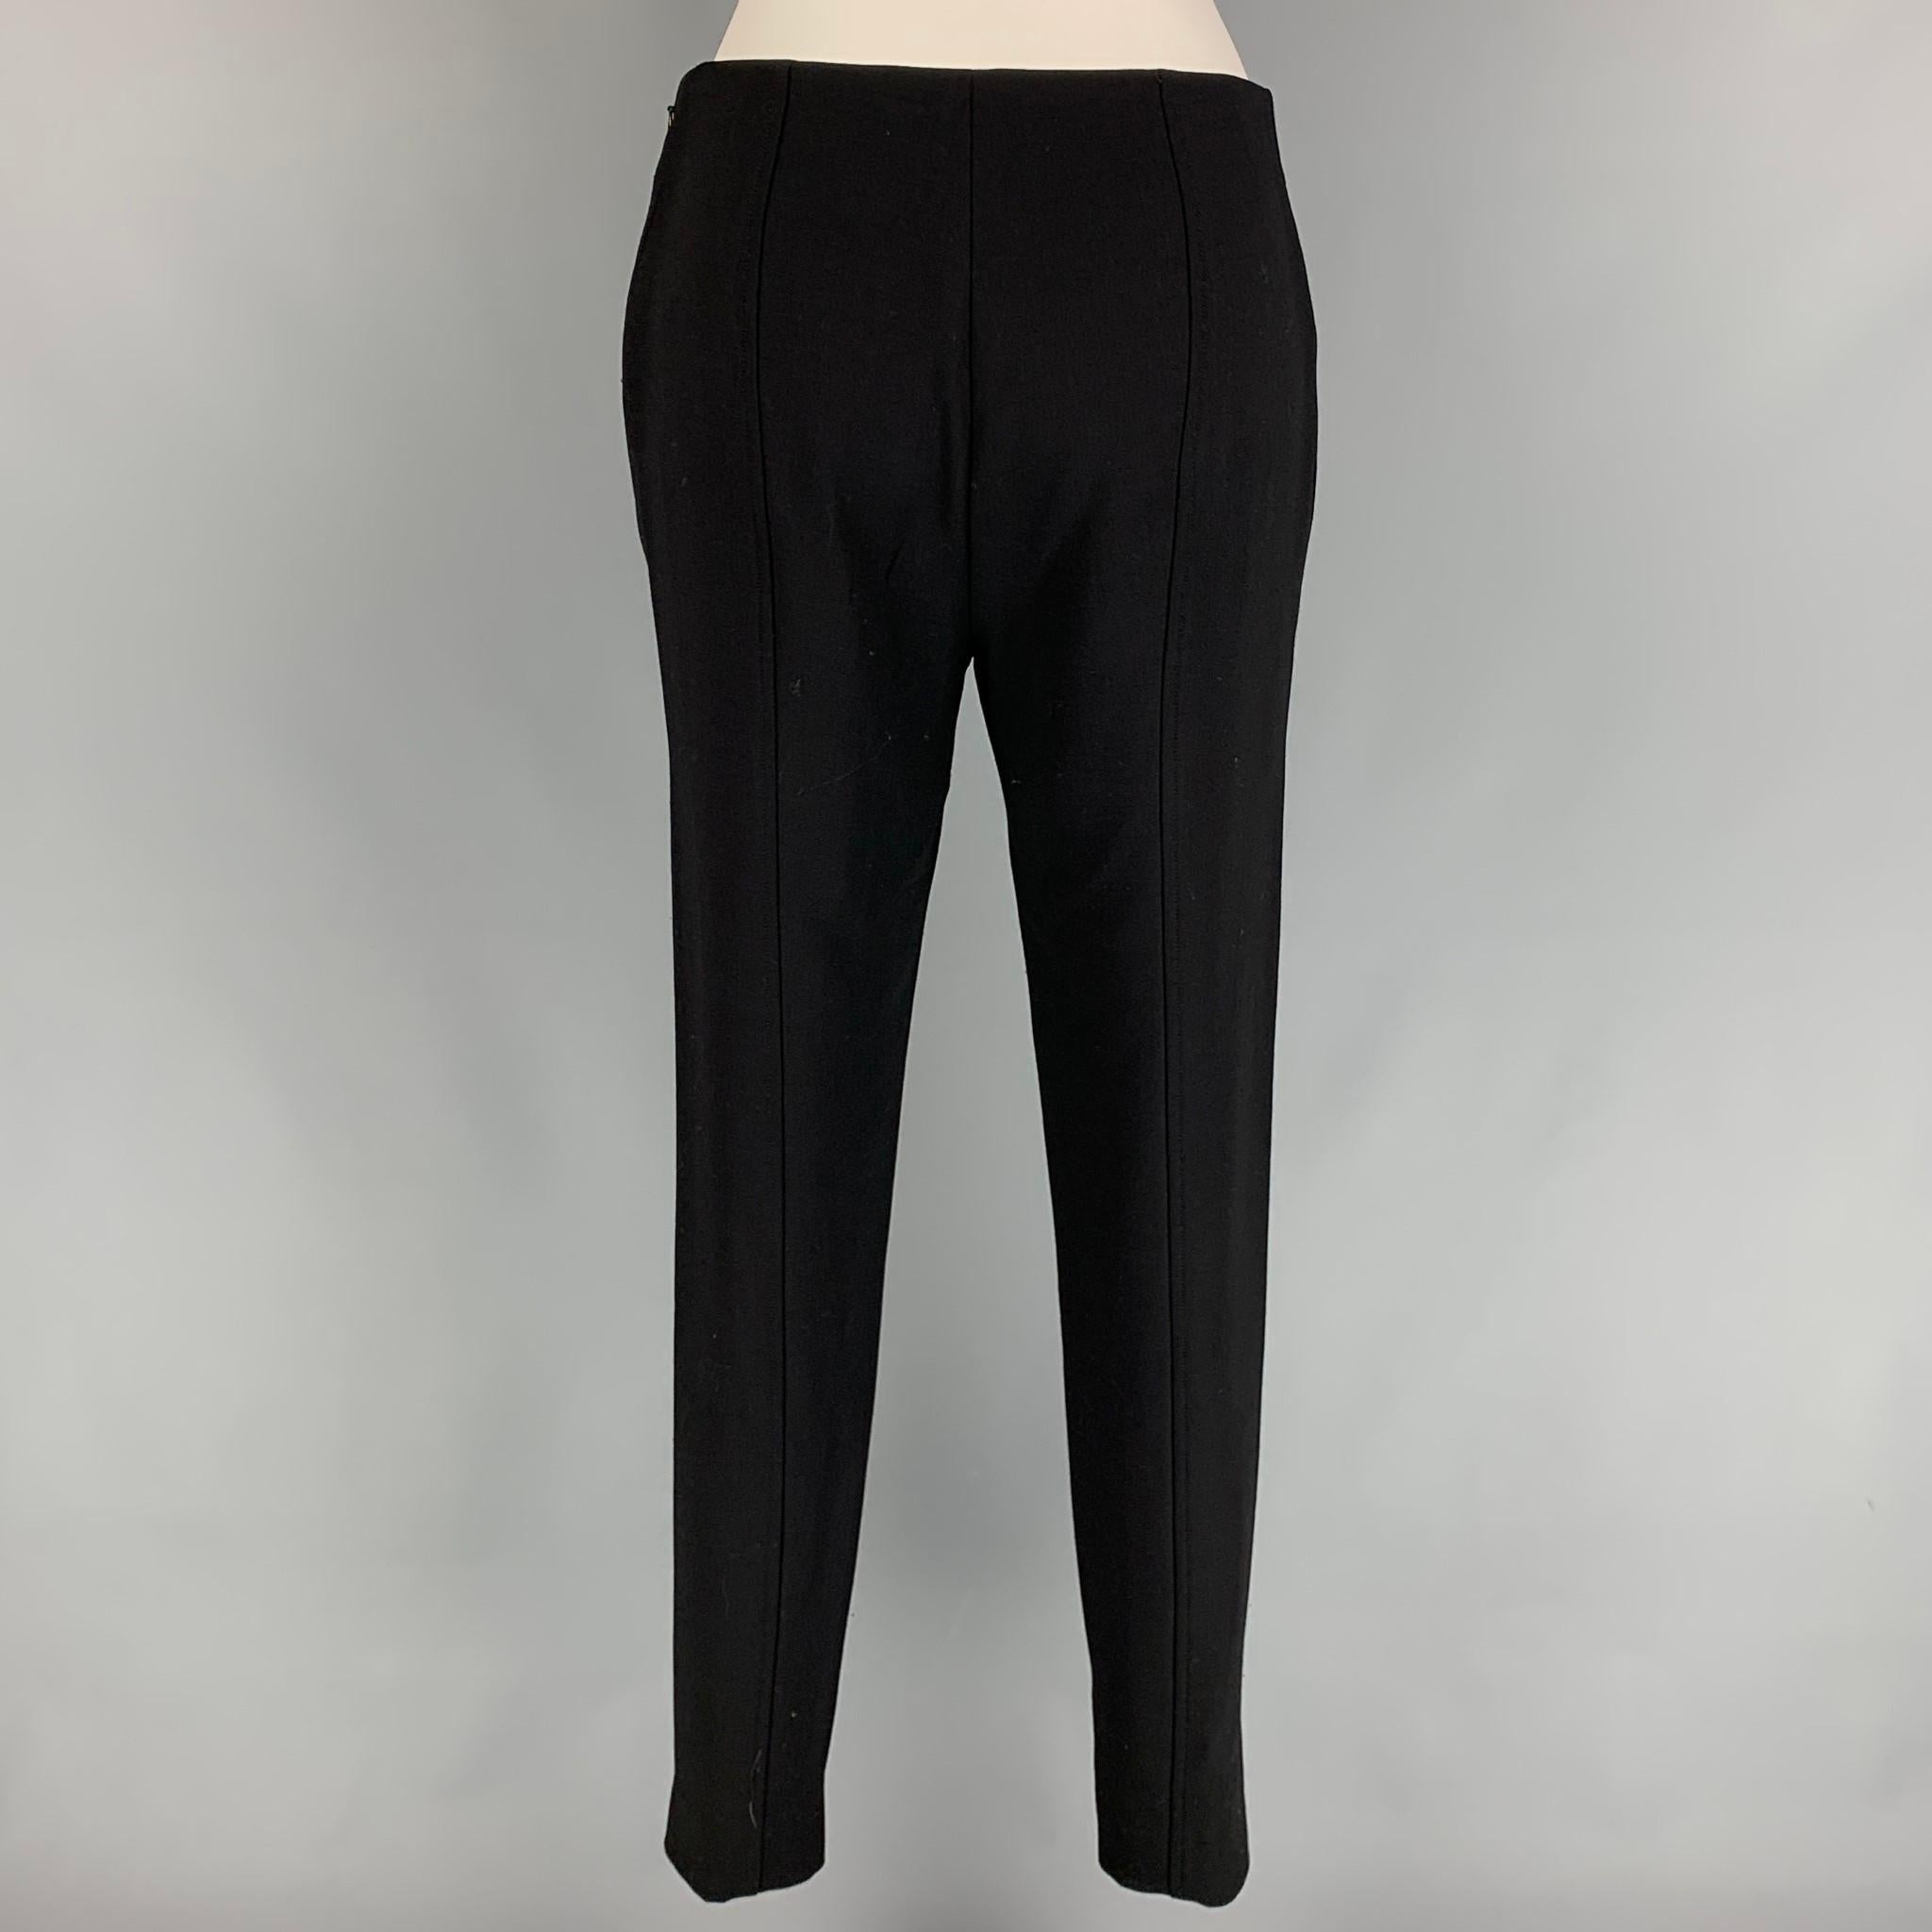 RALPH LAUREN Collection dress pants comes in a black wool featuring a narrow leg, leg zipper details, and a side zipper closure. Made in USA. 

Very Good Pre-Owned Condition.
Marked: 6
Original Retail Price: $995.00

Measurements:

Waist: 28